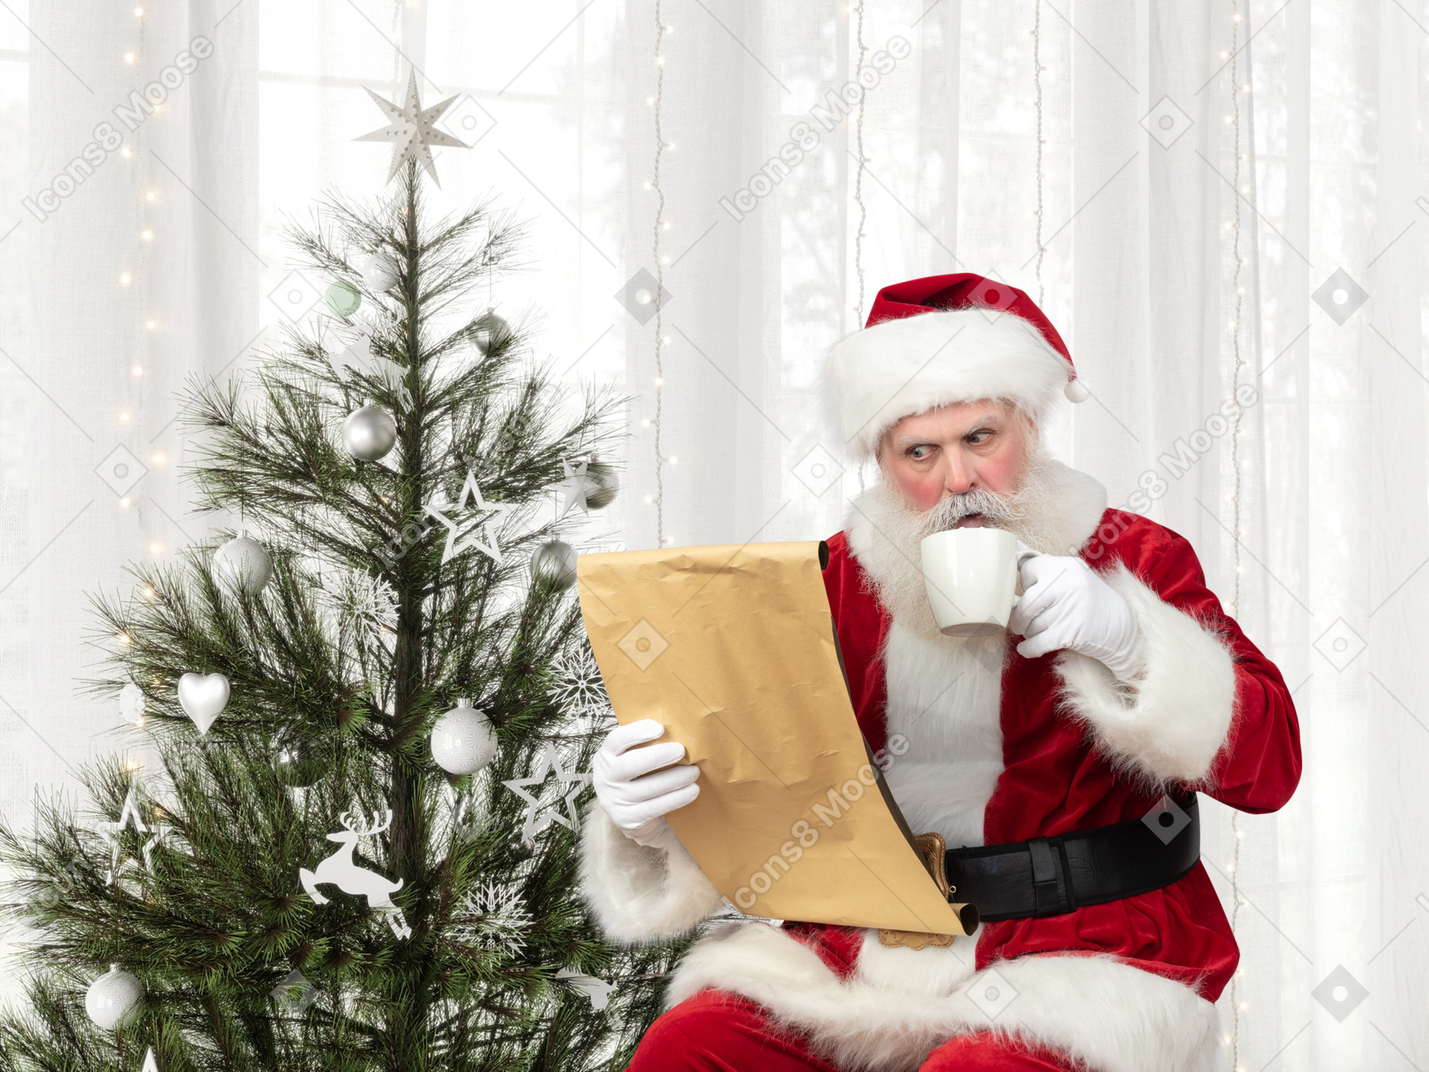 Santa claus reading your gift list